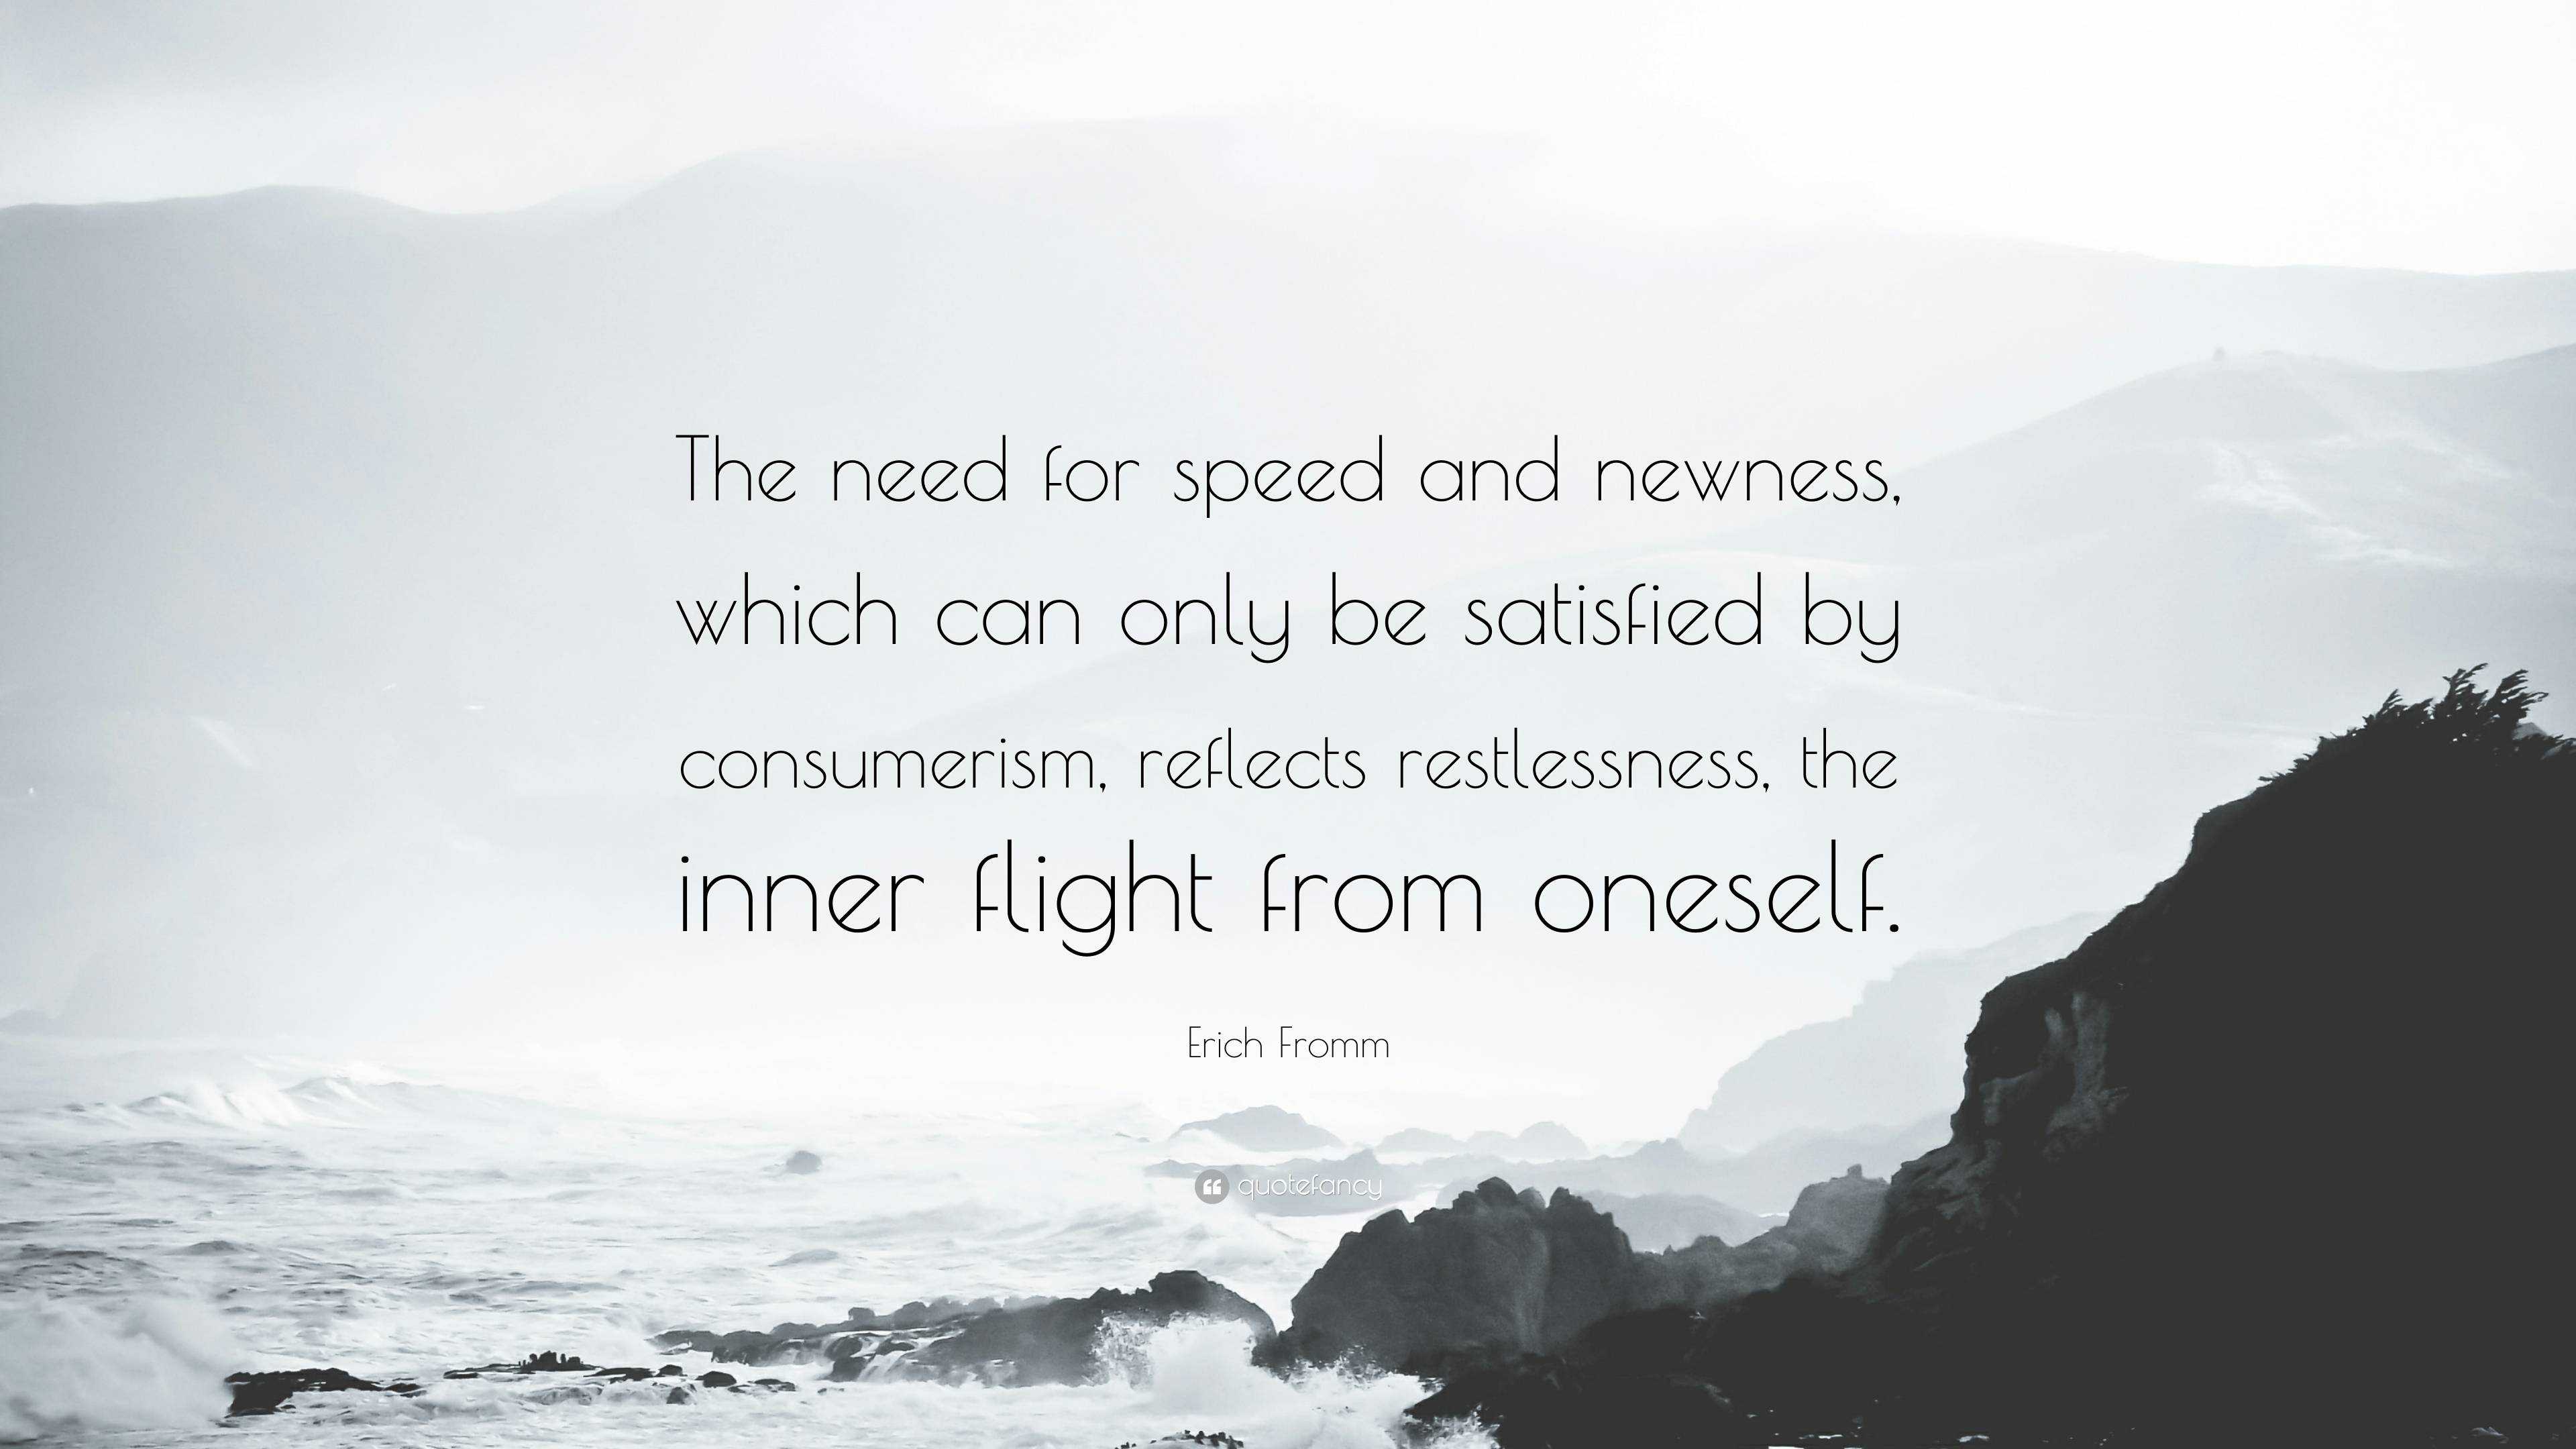 Erich Fromm Quote: “The need for speed and newness, which can only be  satisfied by consumerism, reflects restlessness, the inner flight from”